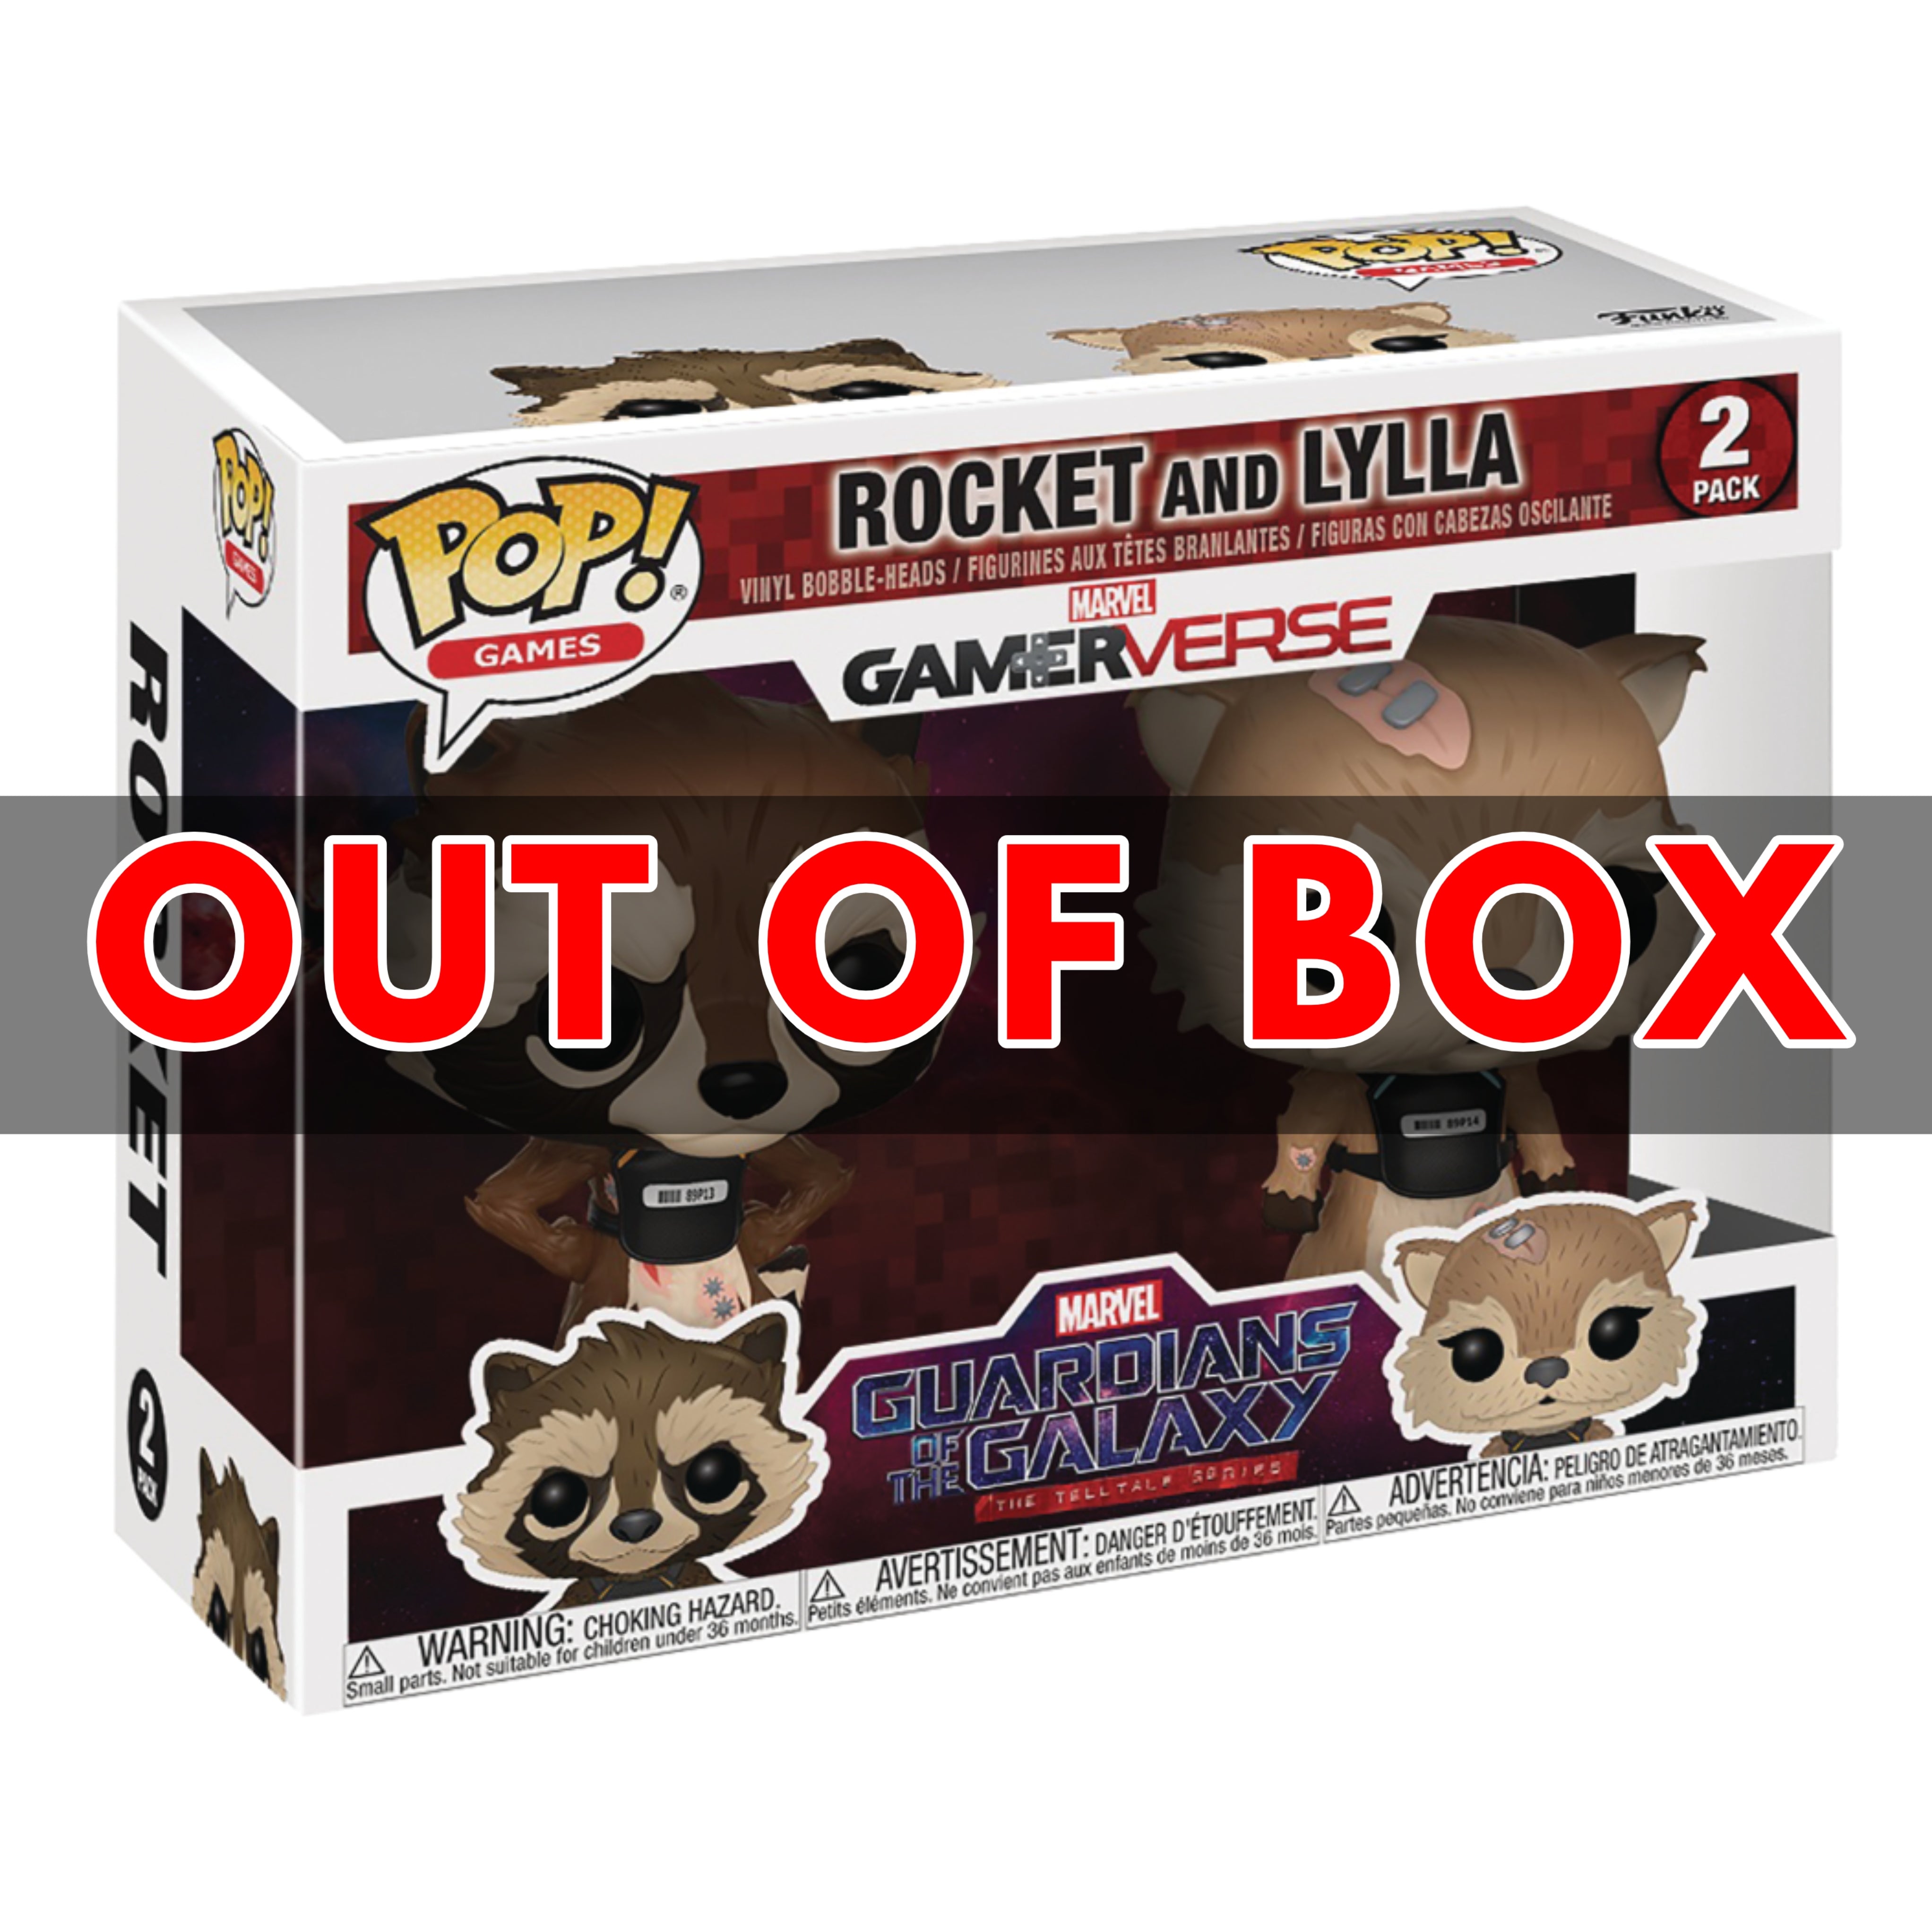 POP! Marvel: Guardians Of The Galaxy, Rocket & Lylla (2-Pack